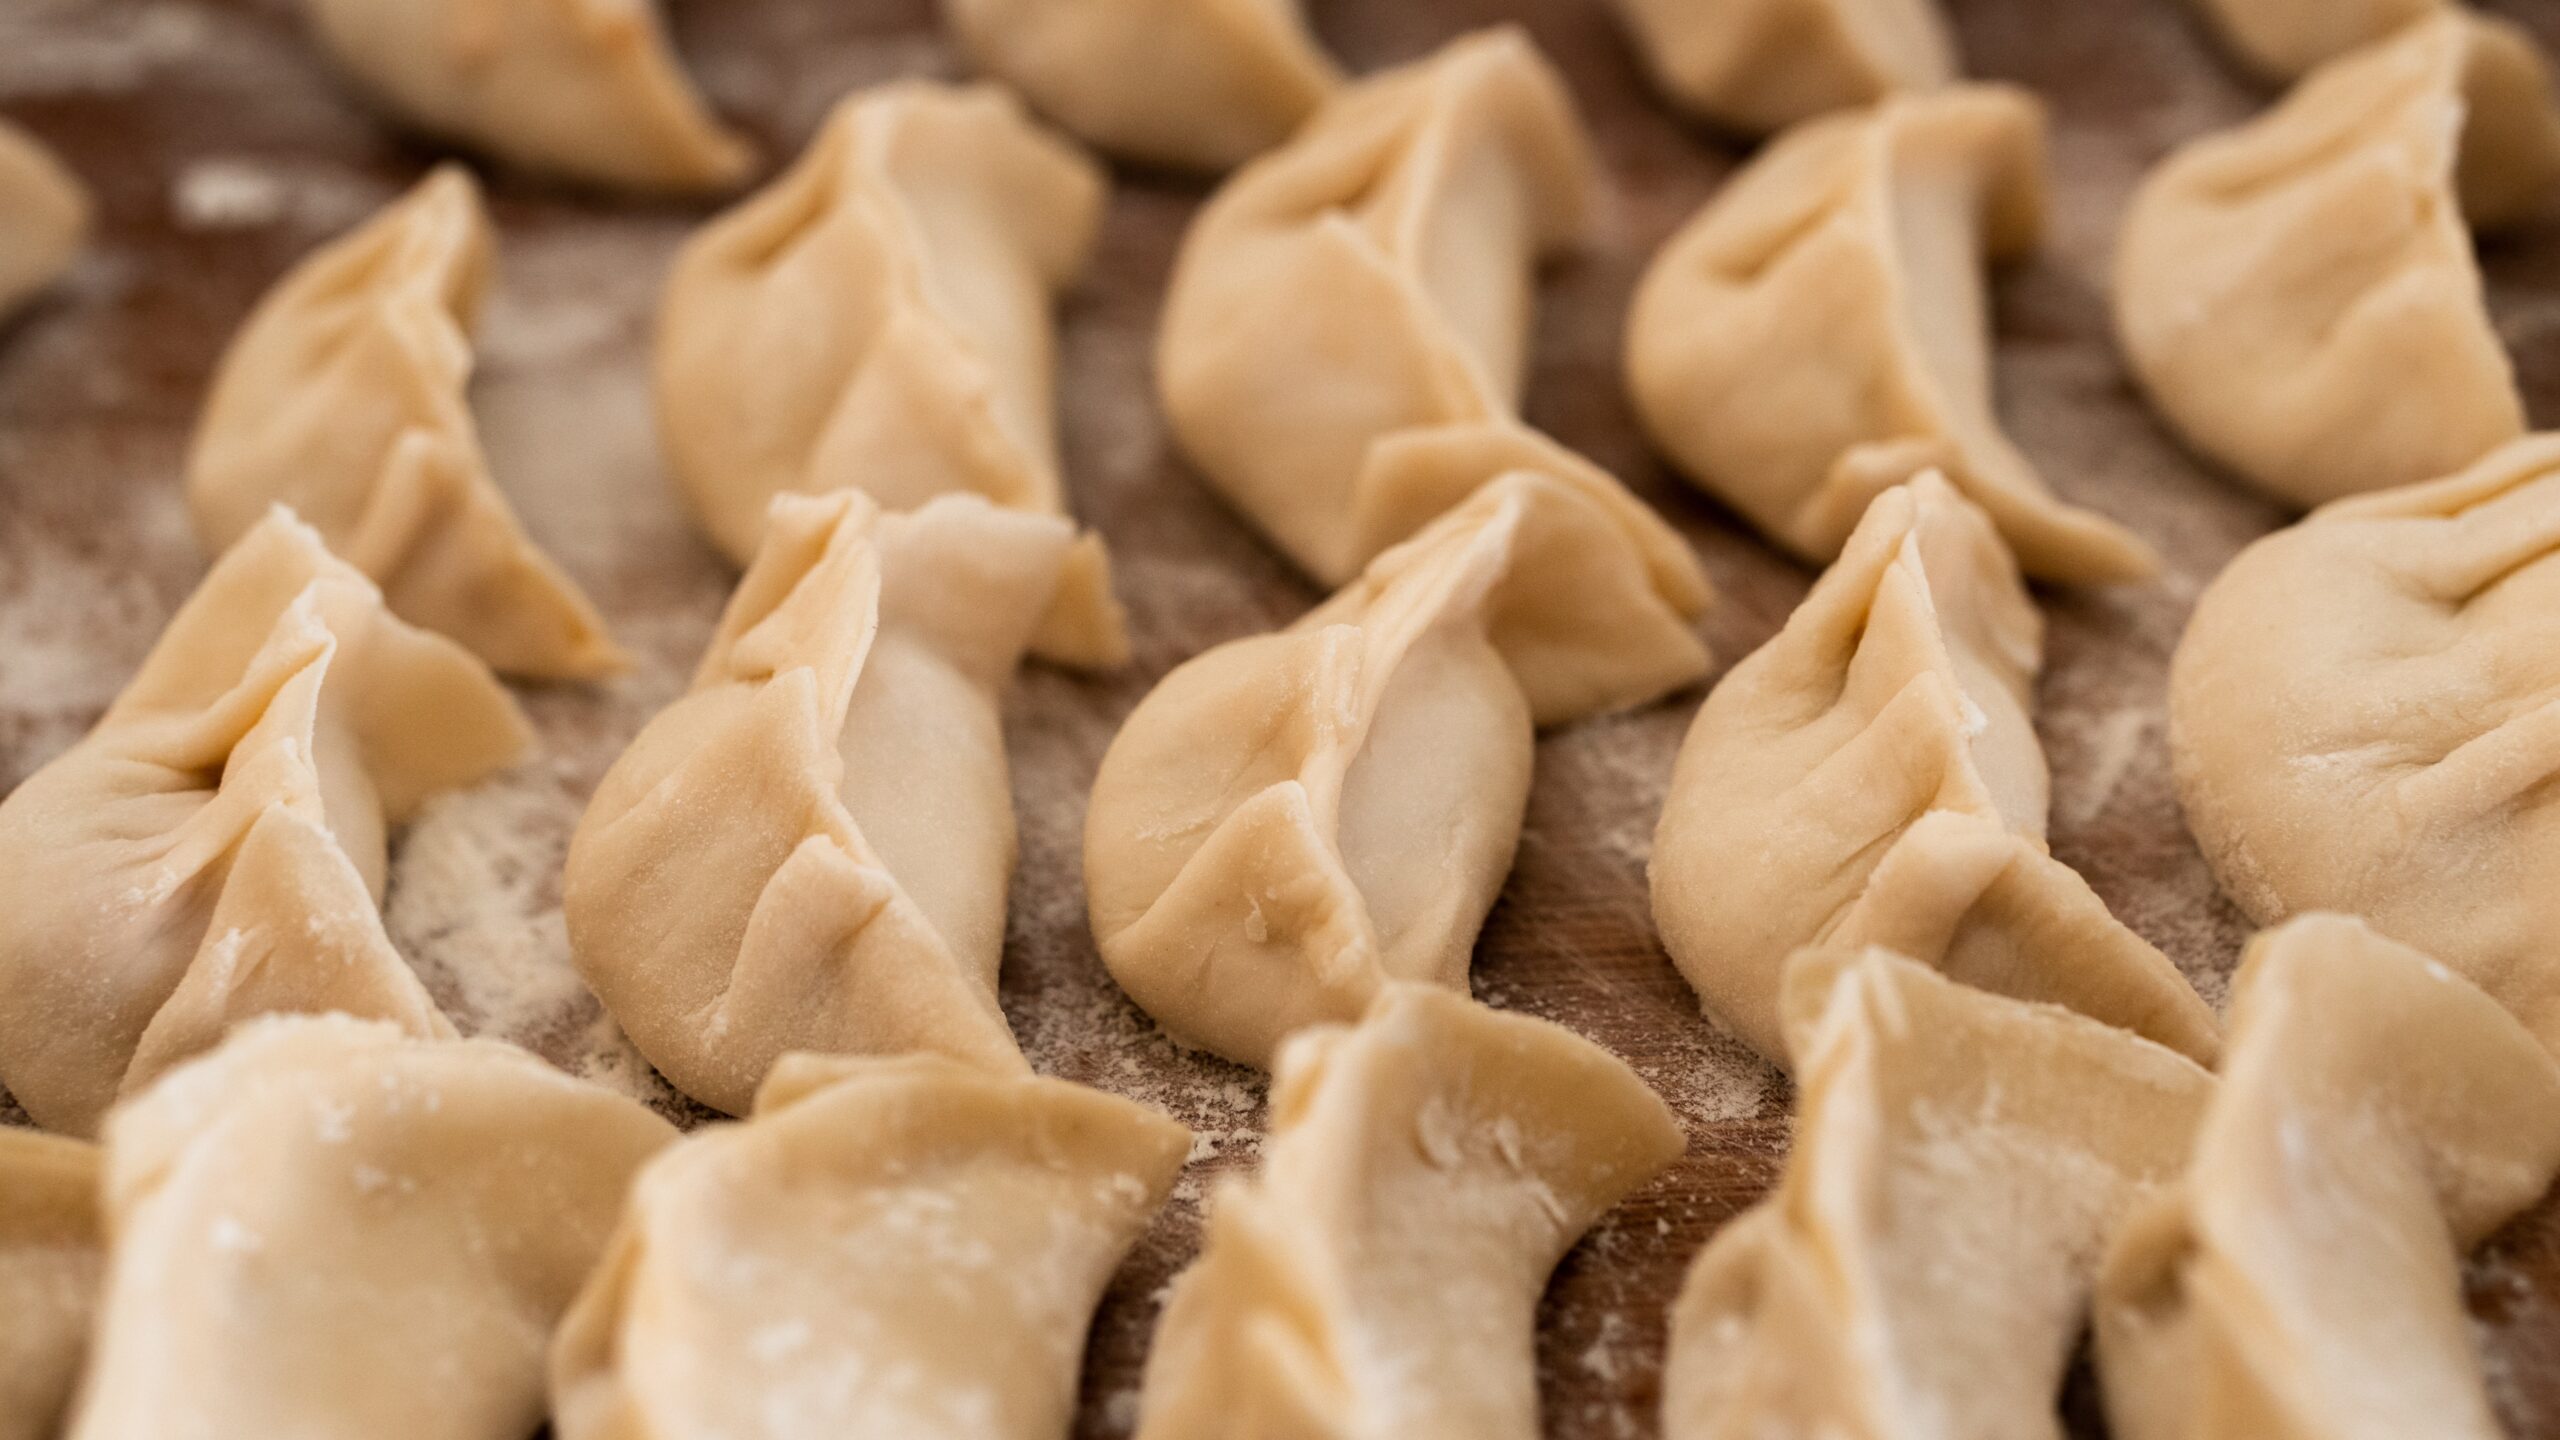 Culture-inspired dishes and TikTok trends are perfect ways to utilize a potluck theme. Pictured: Dumplings.